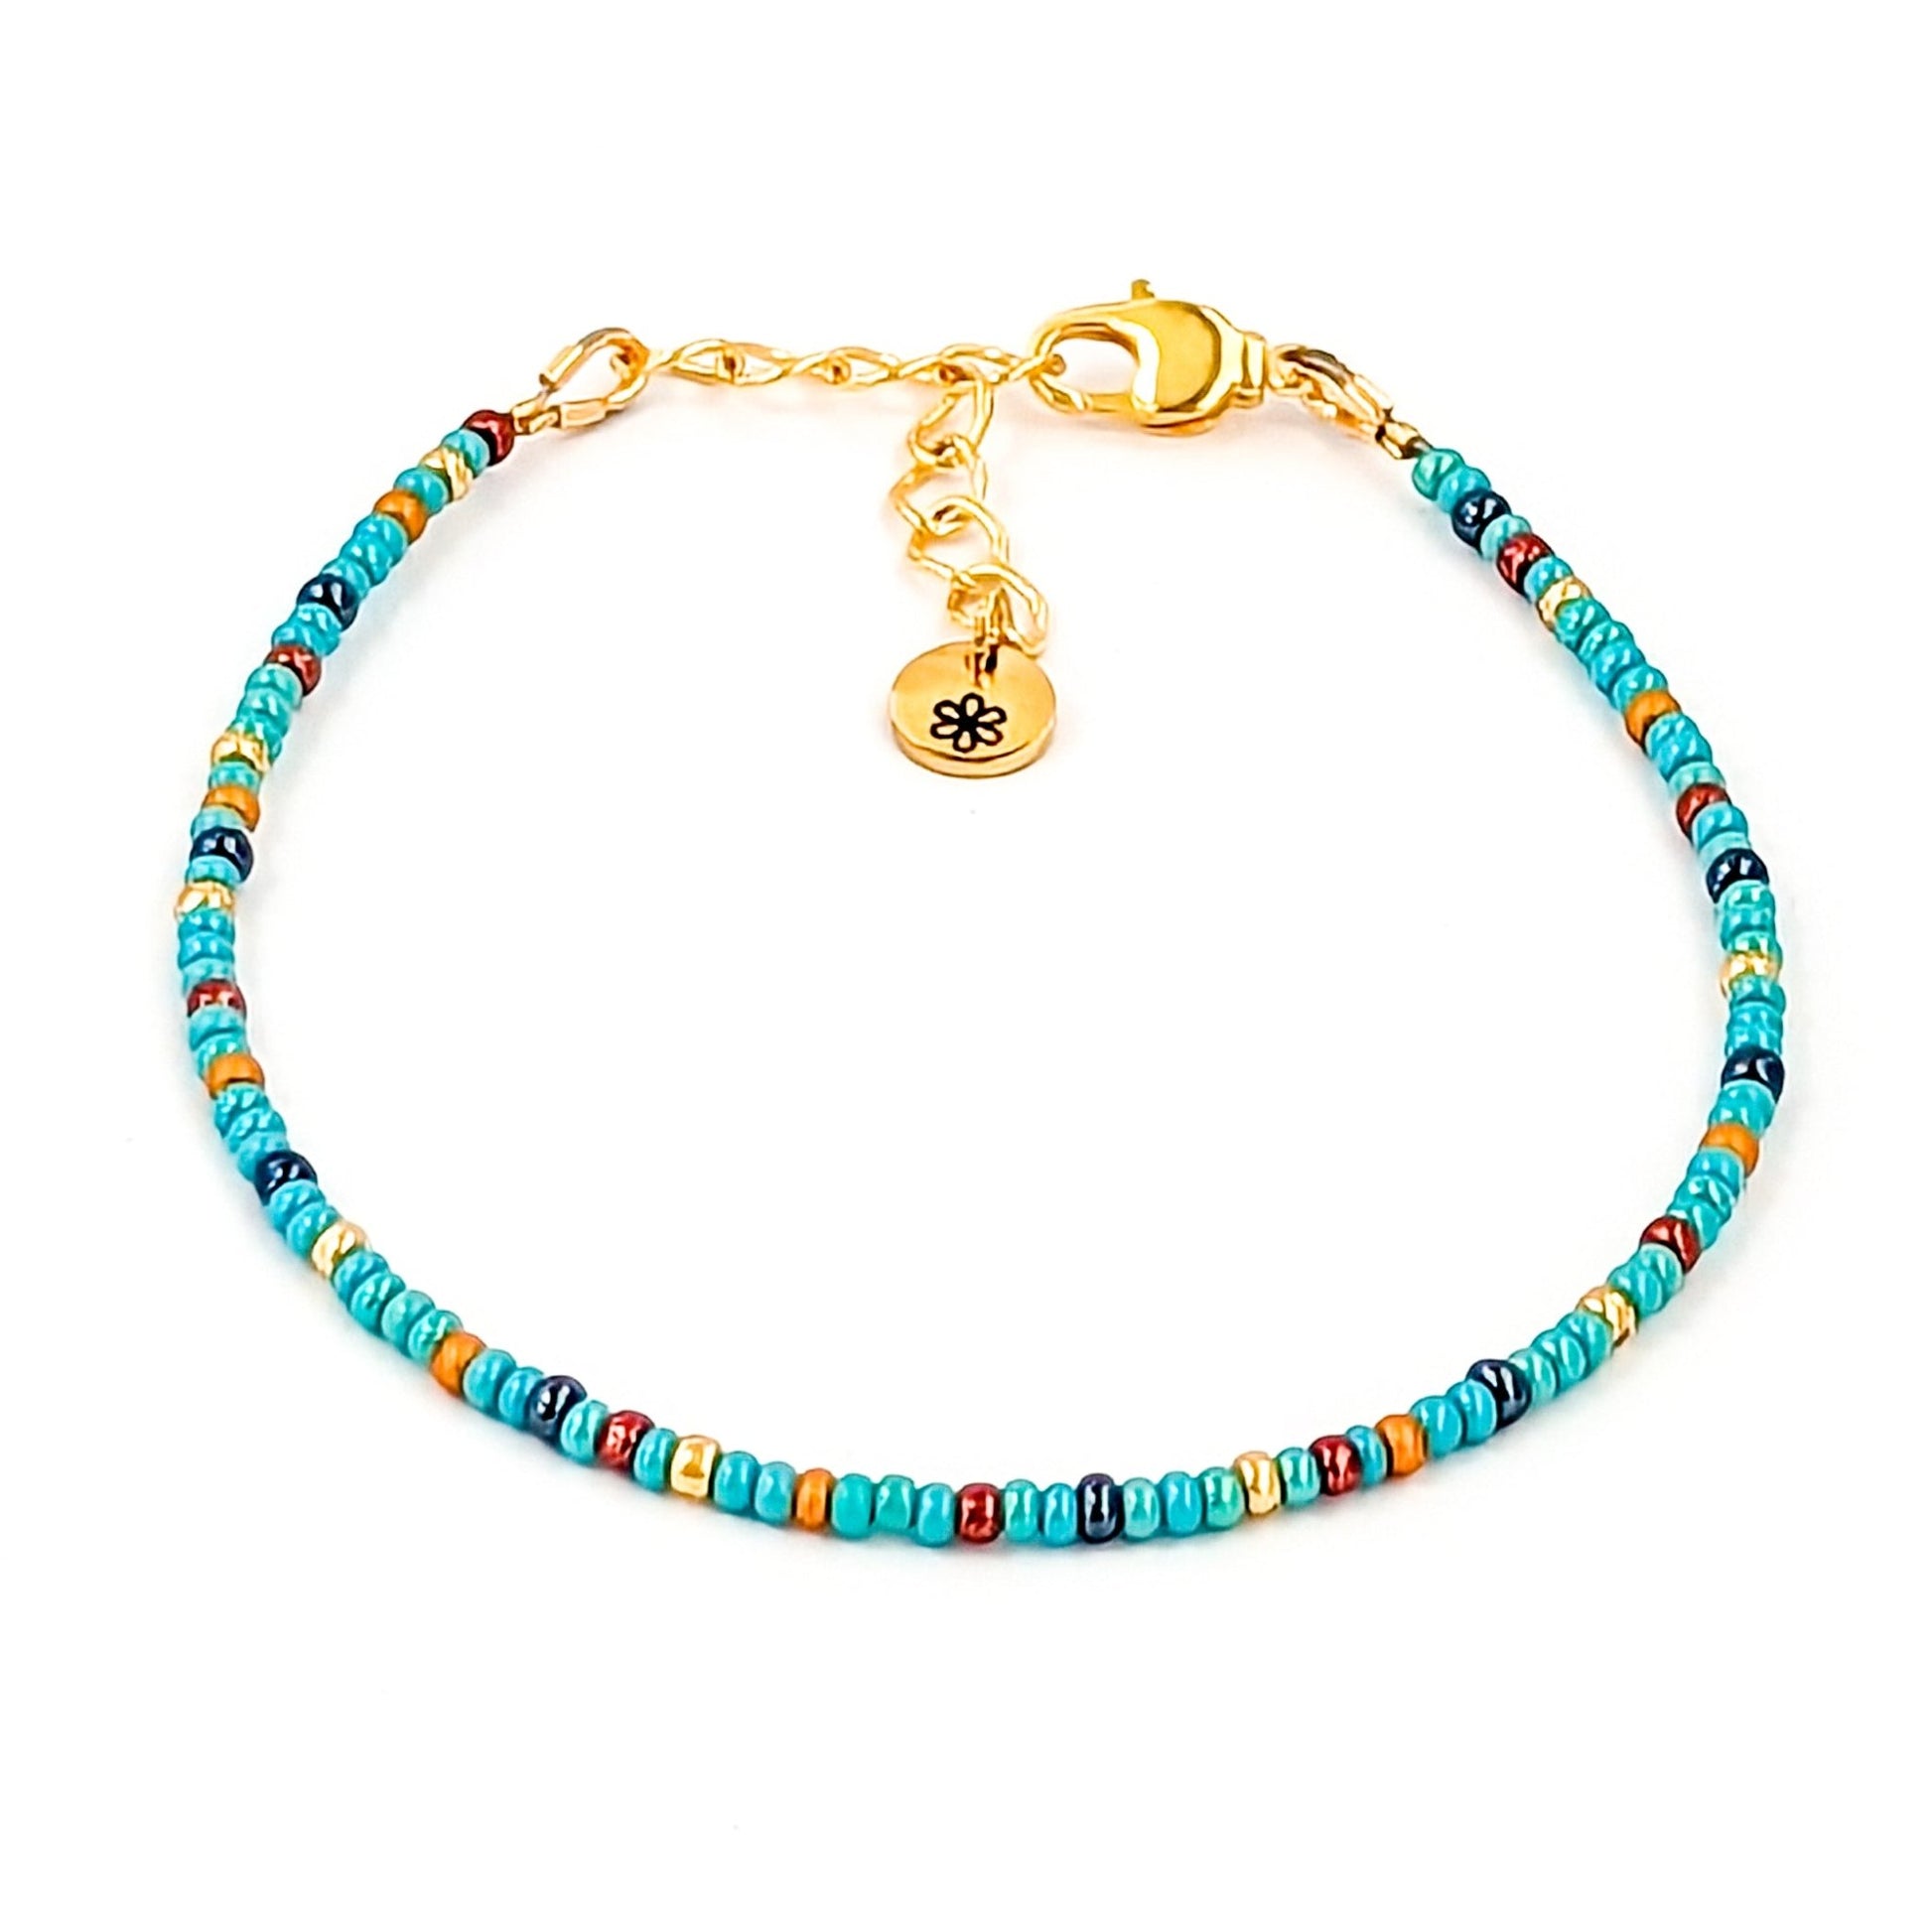 Dainty bracelet - turquoise, gunmetal, gold and copper glass seed beads - creations by cherie